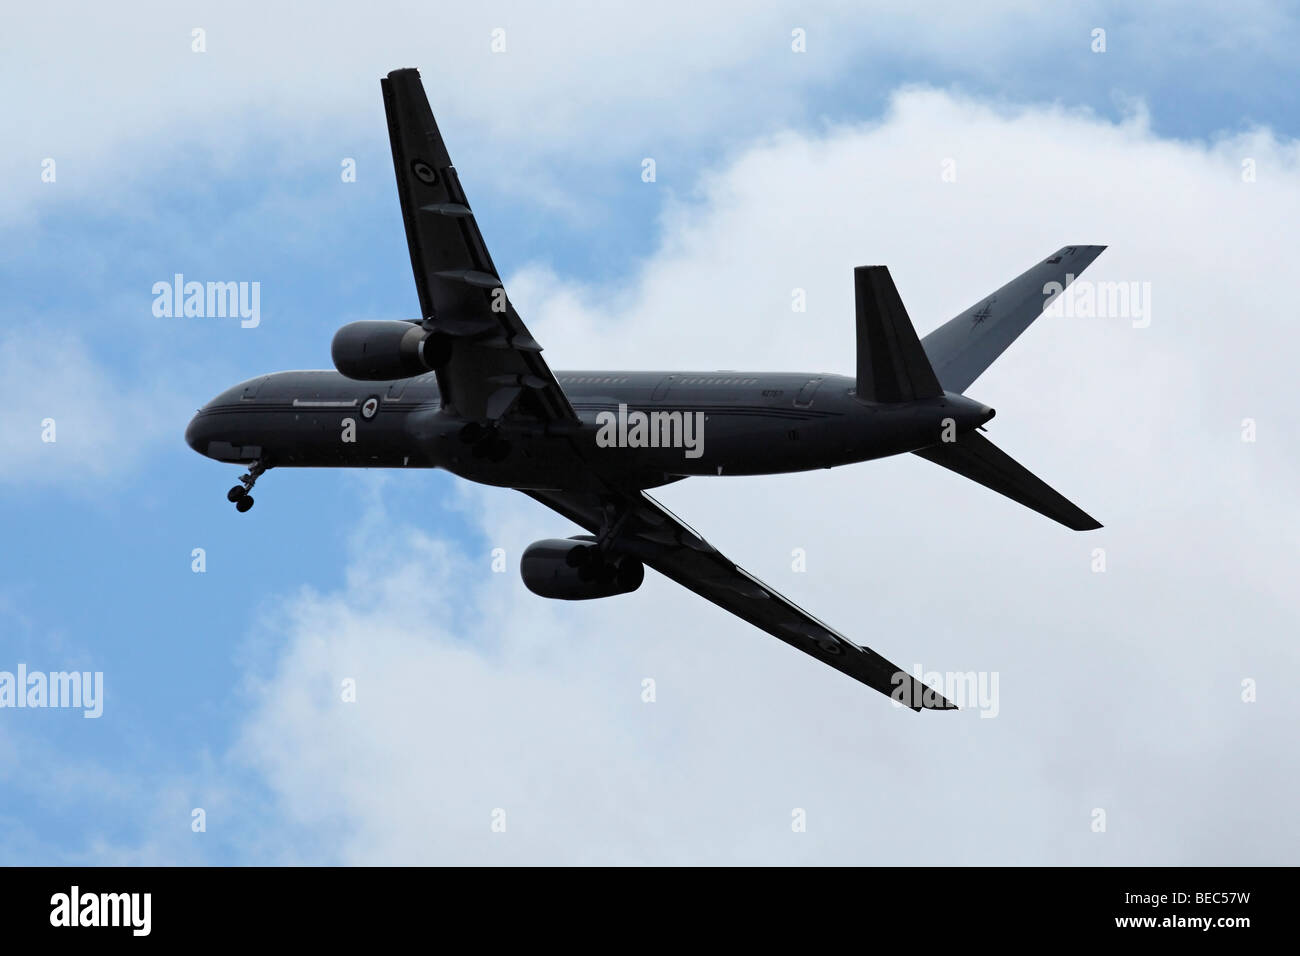 Royal New Zealand Air Force Boeing 757-200 Military Aircraft in Flight Stock Photo